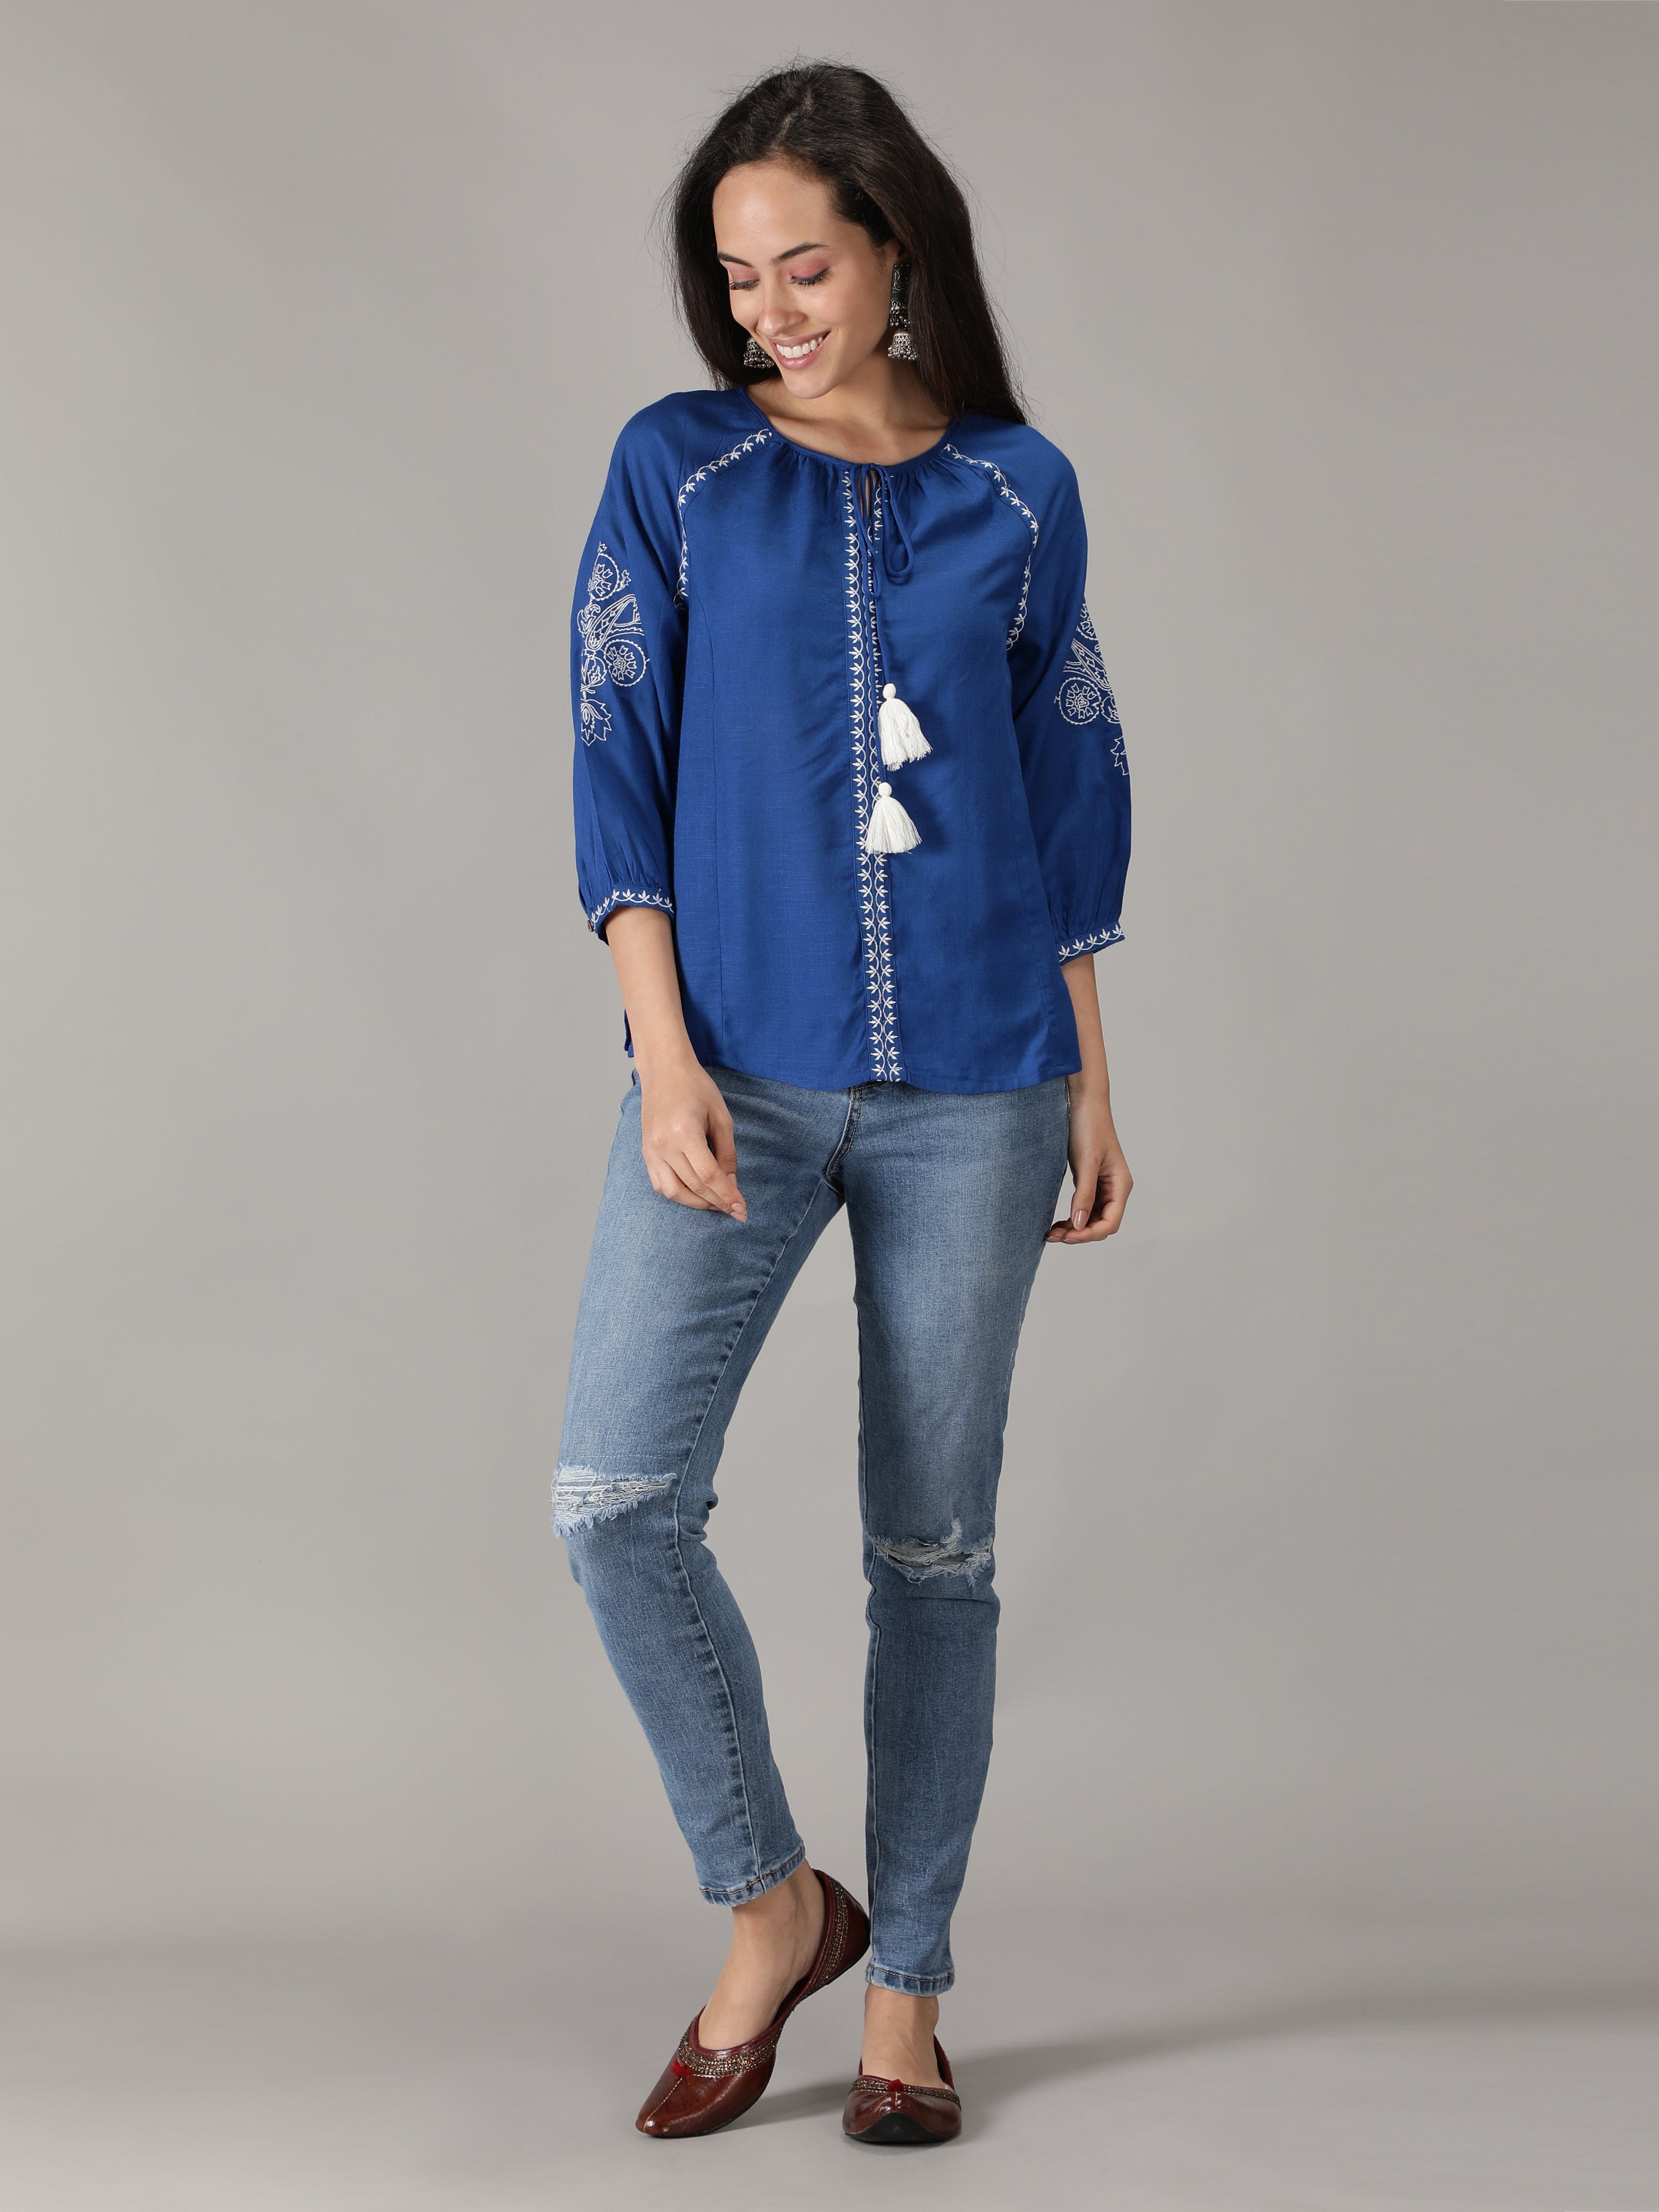 blue-embroidered-top-with-tie-ups